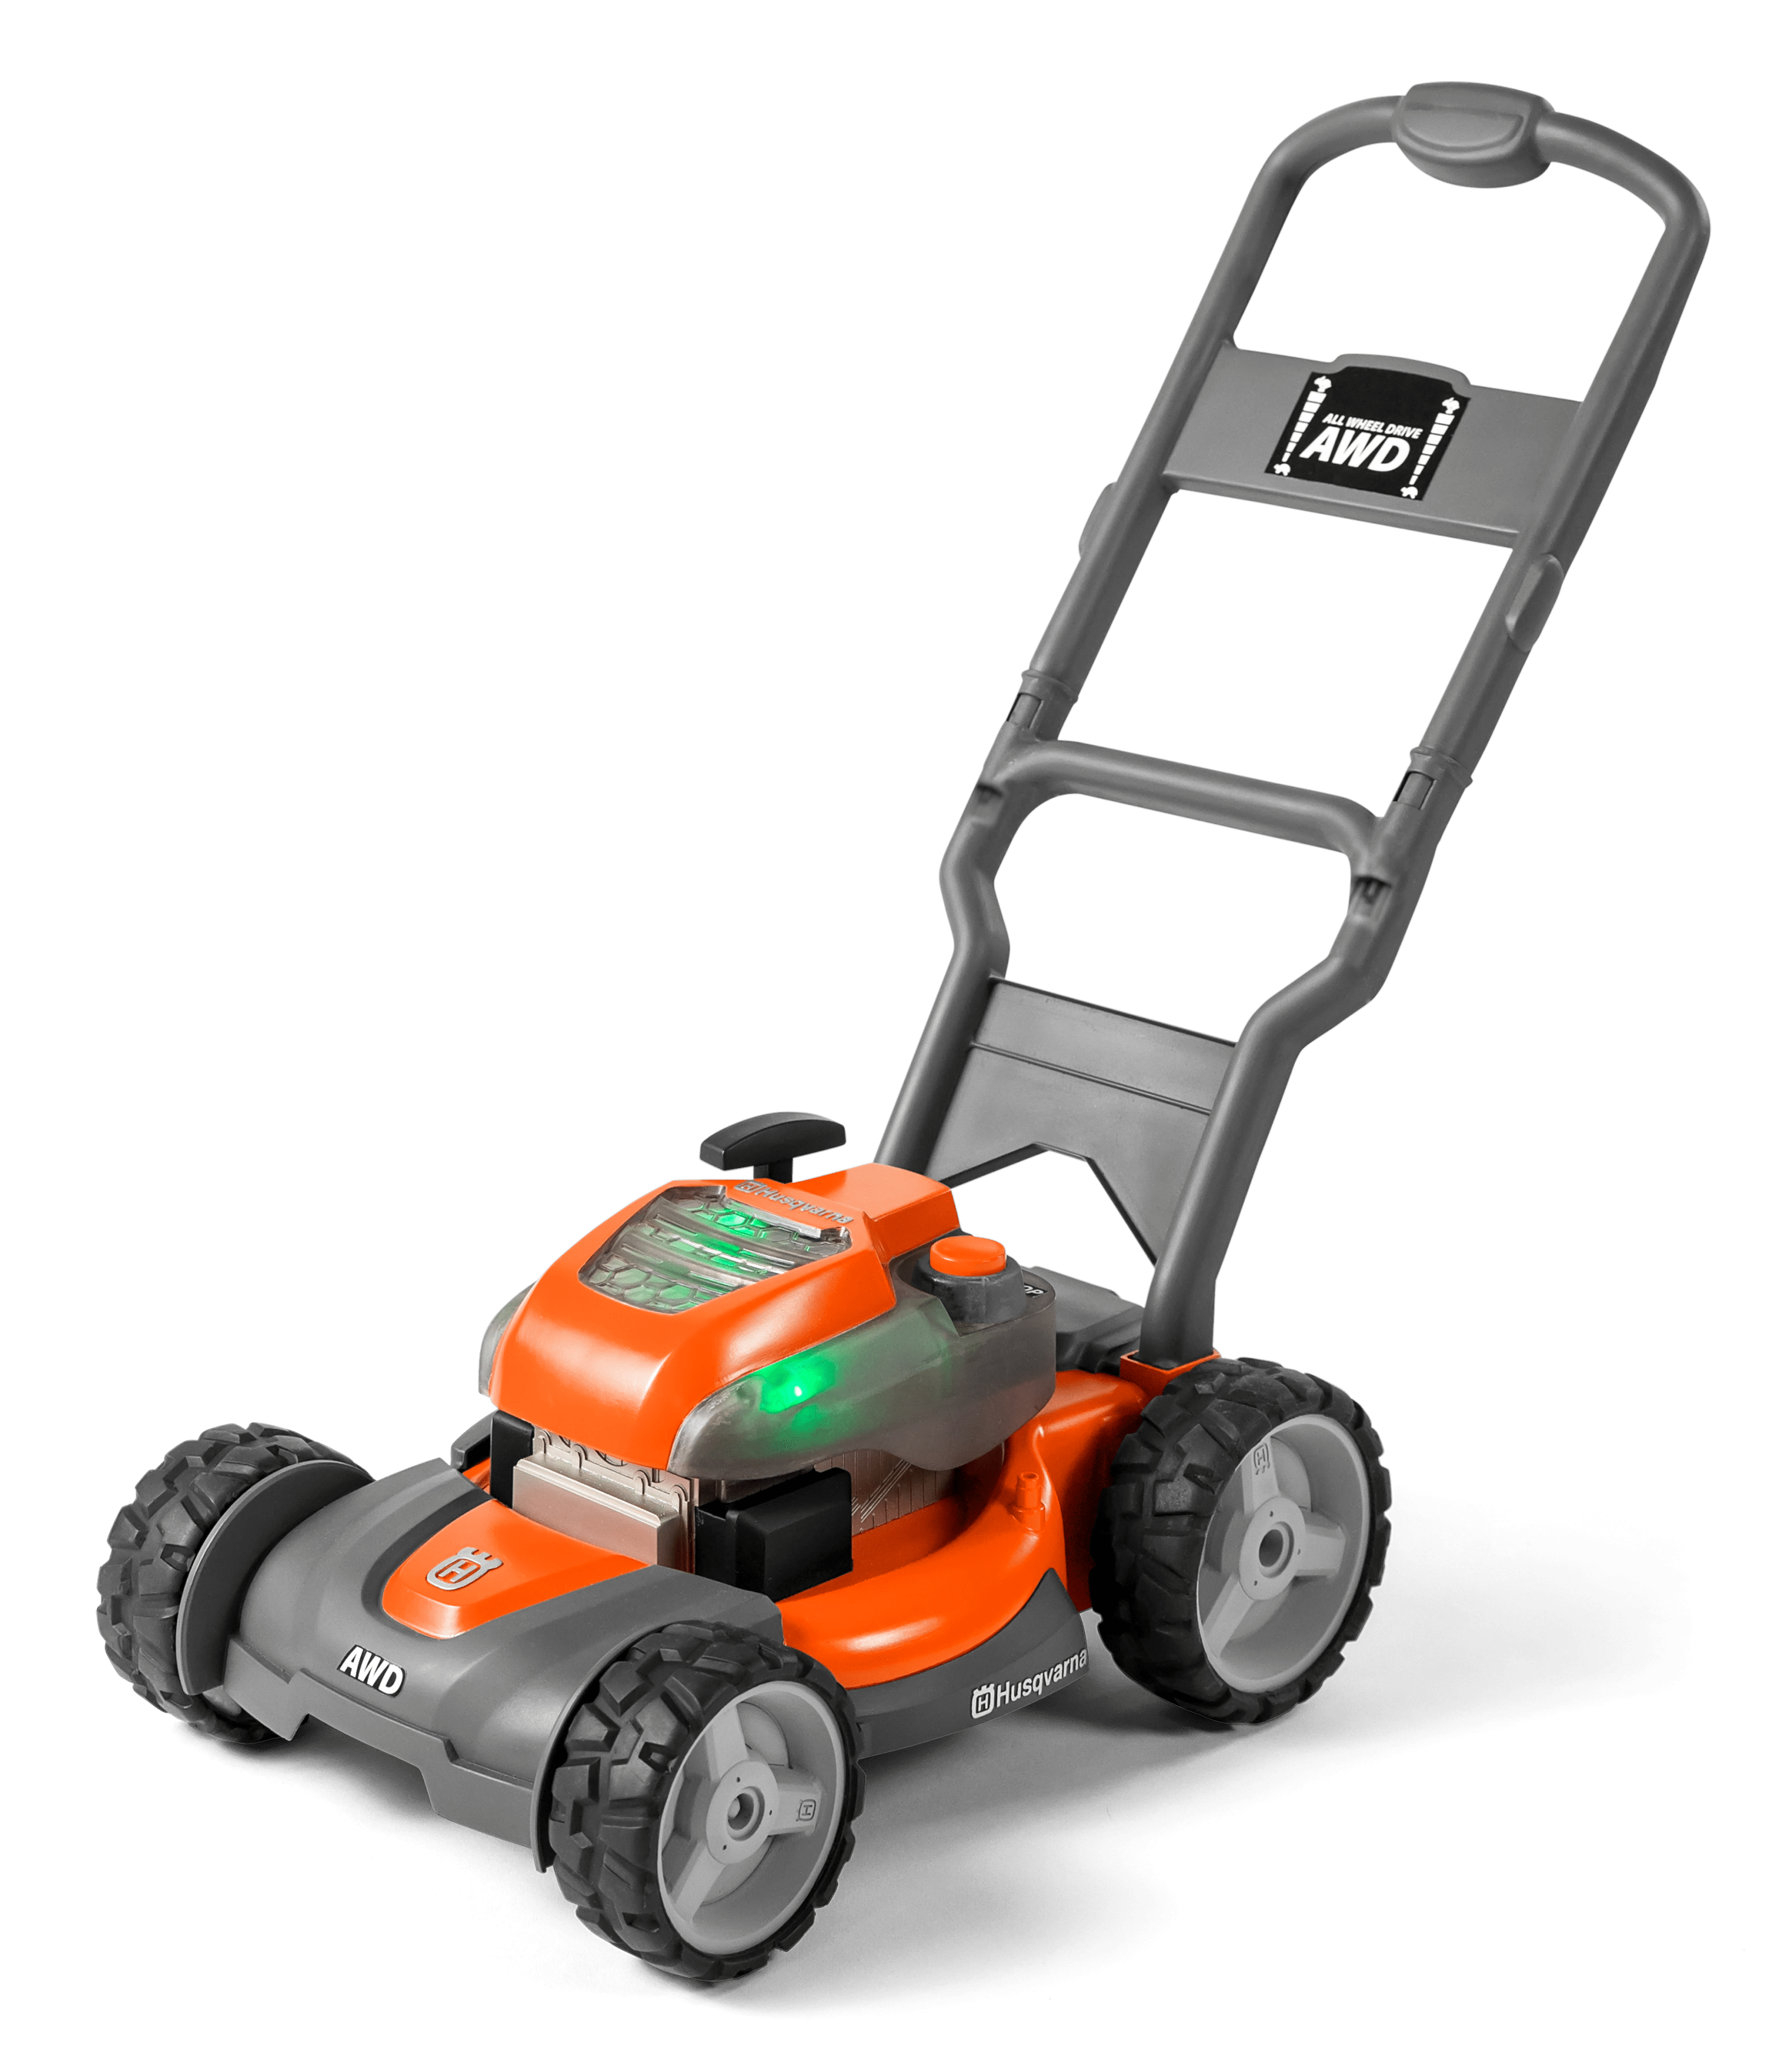 Toy Lawn Mower image 0